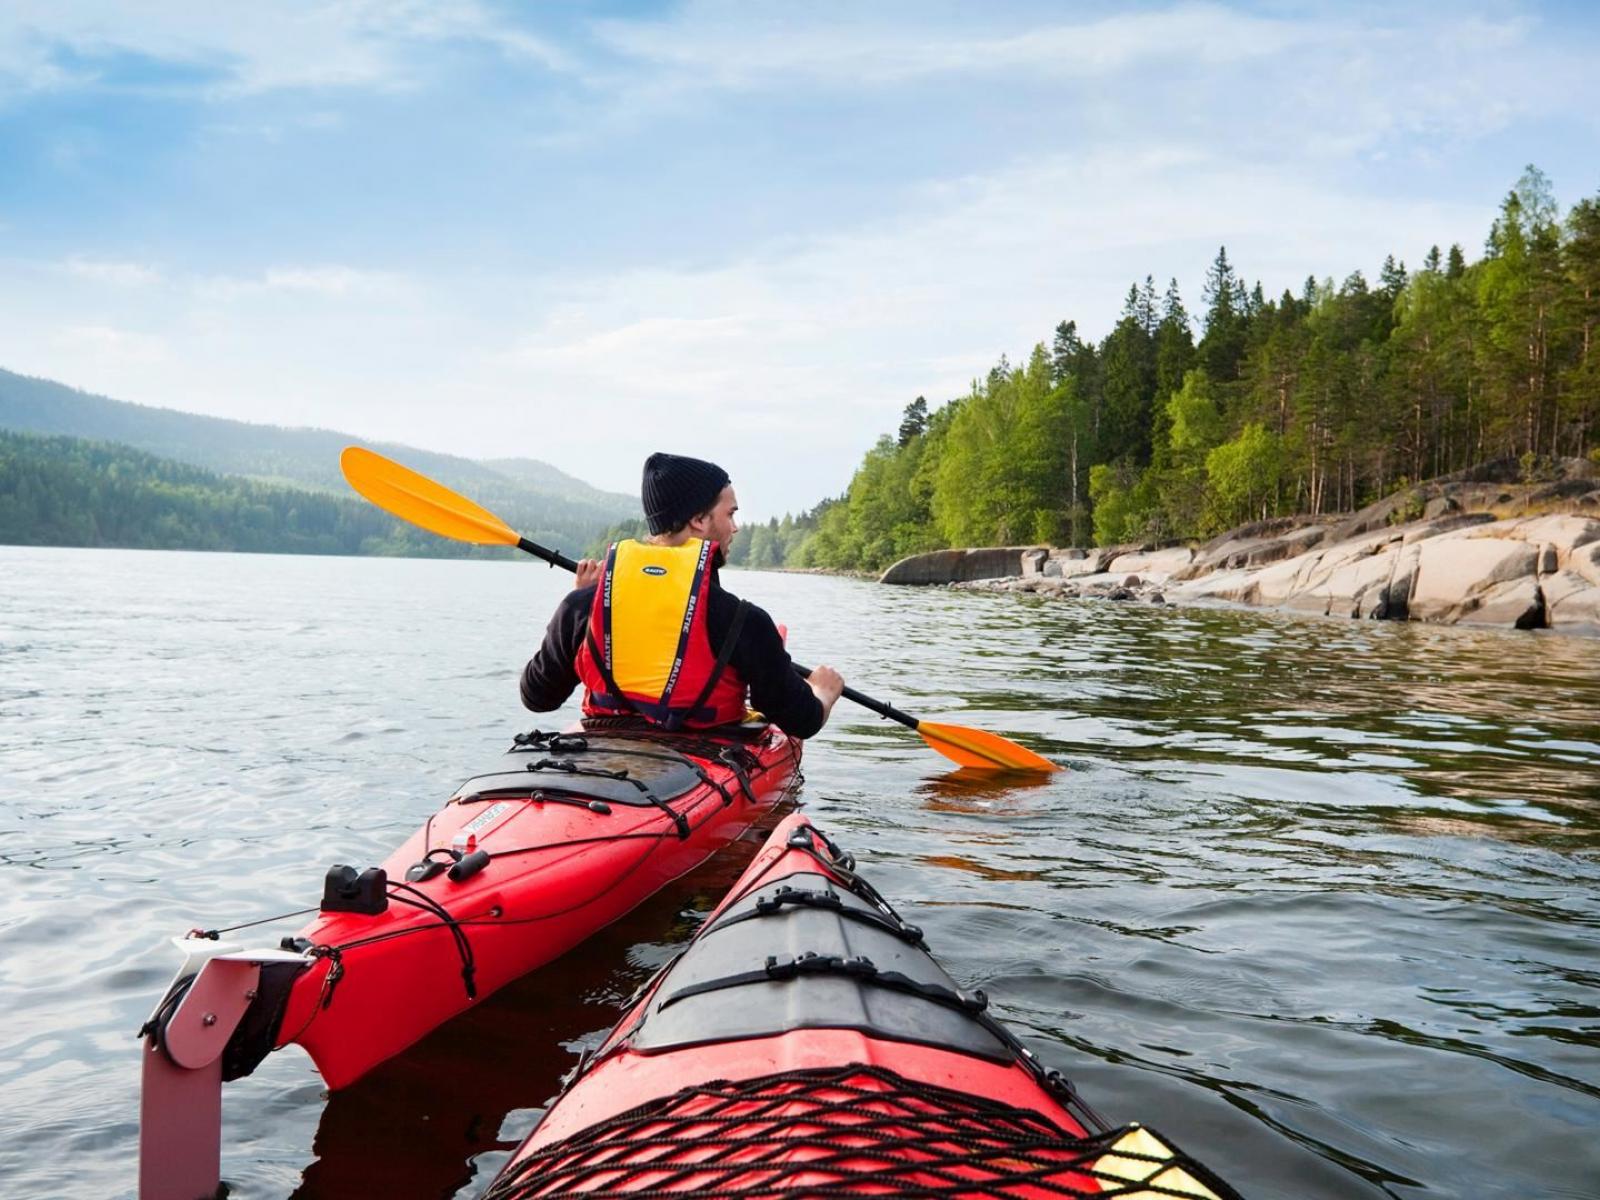 The High Coast Kayaking Route